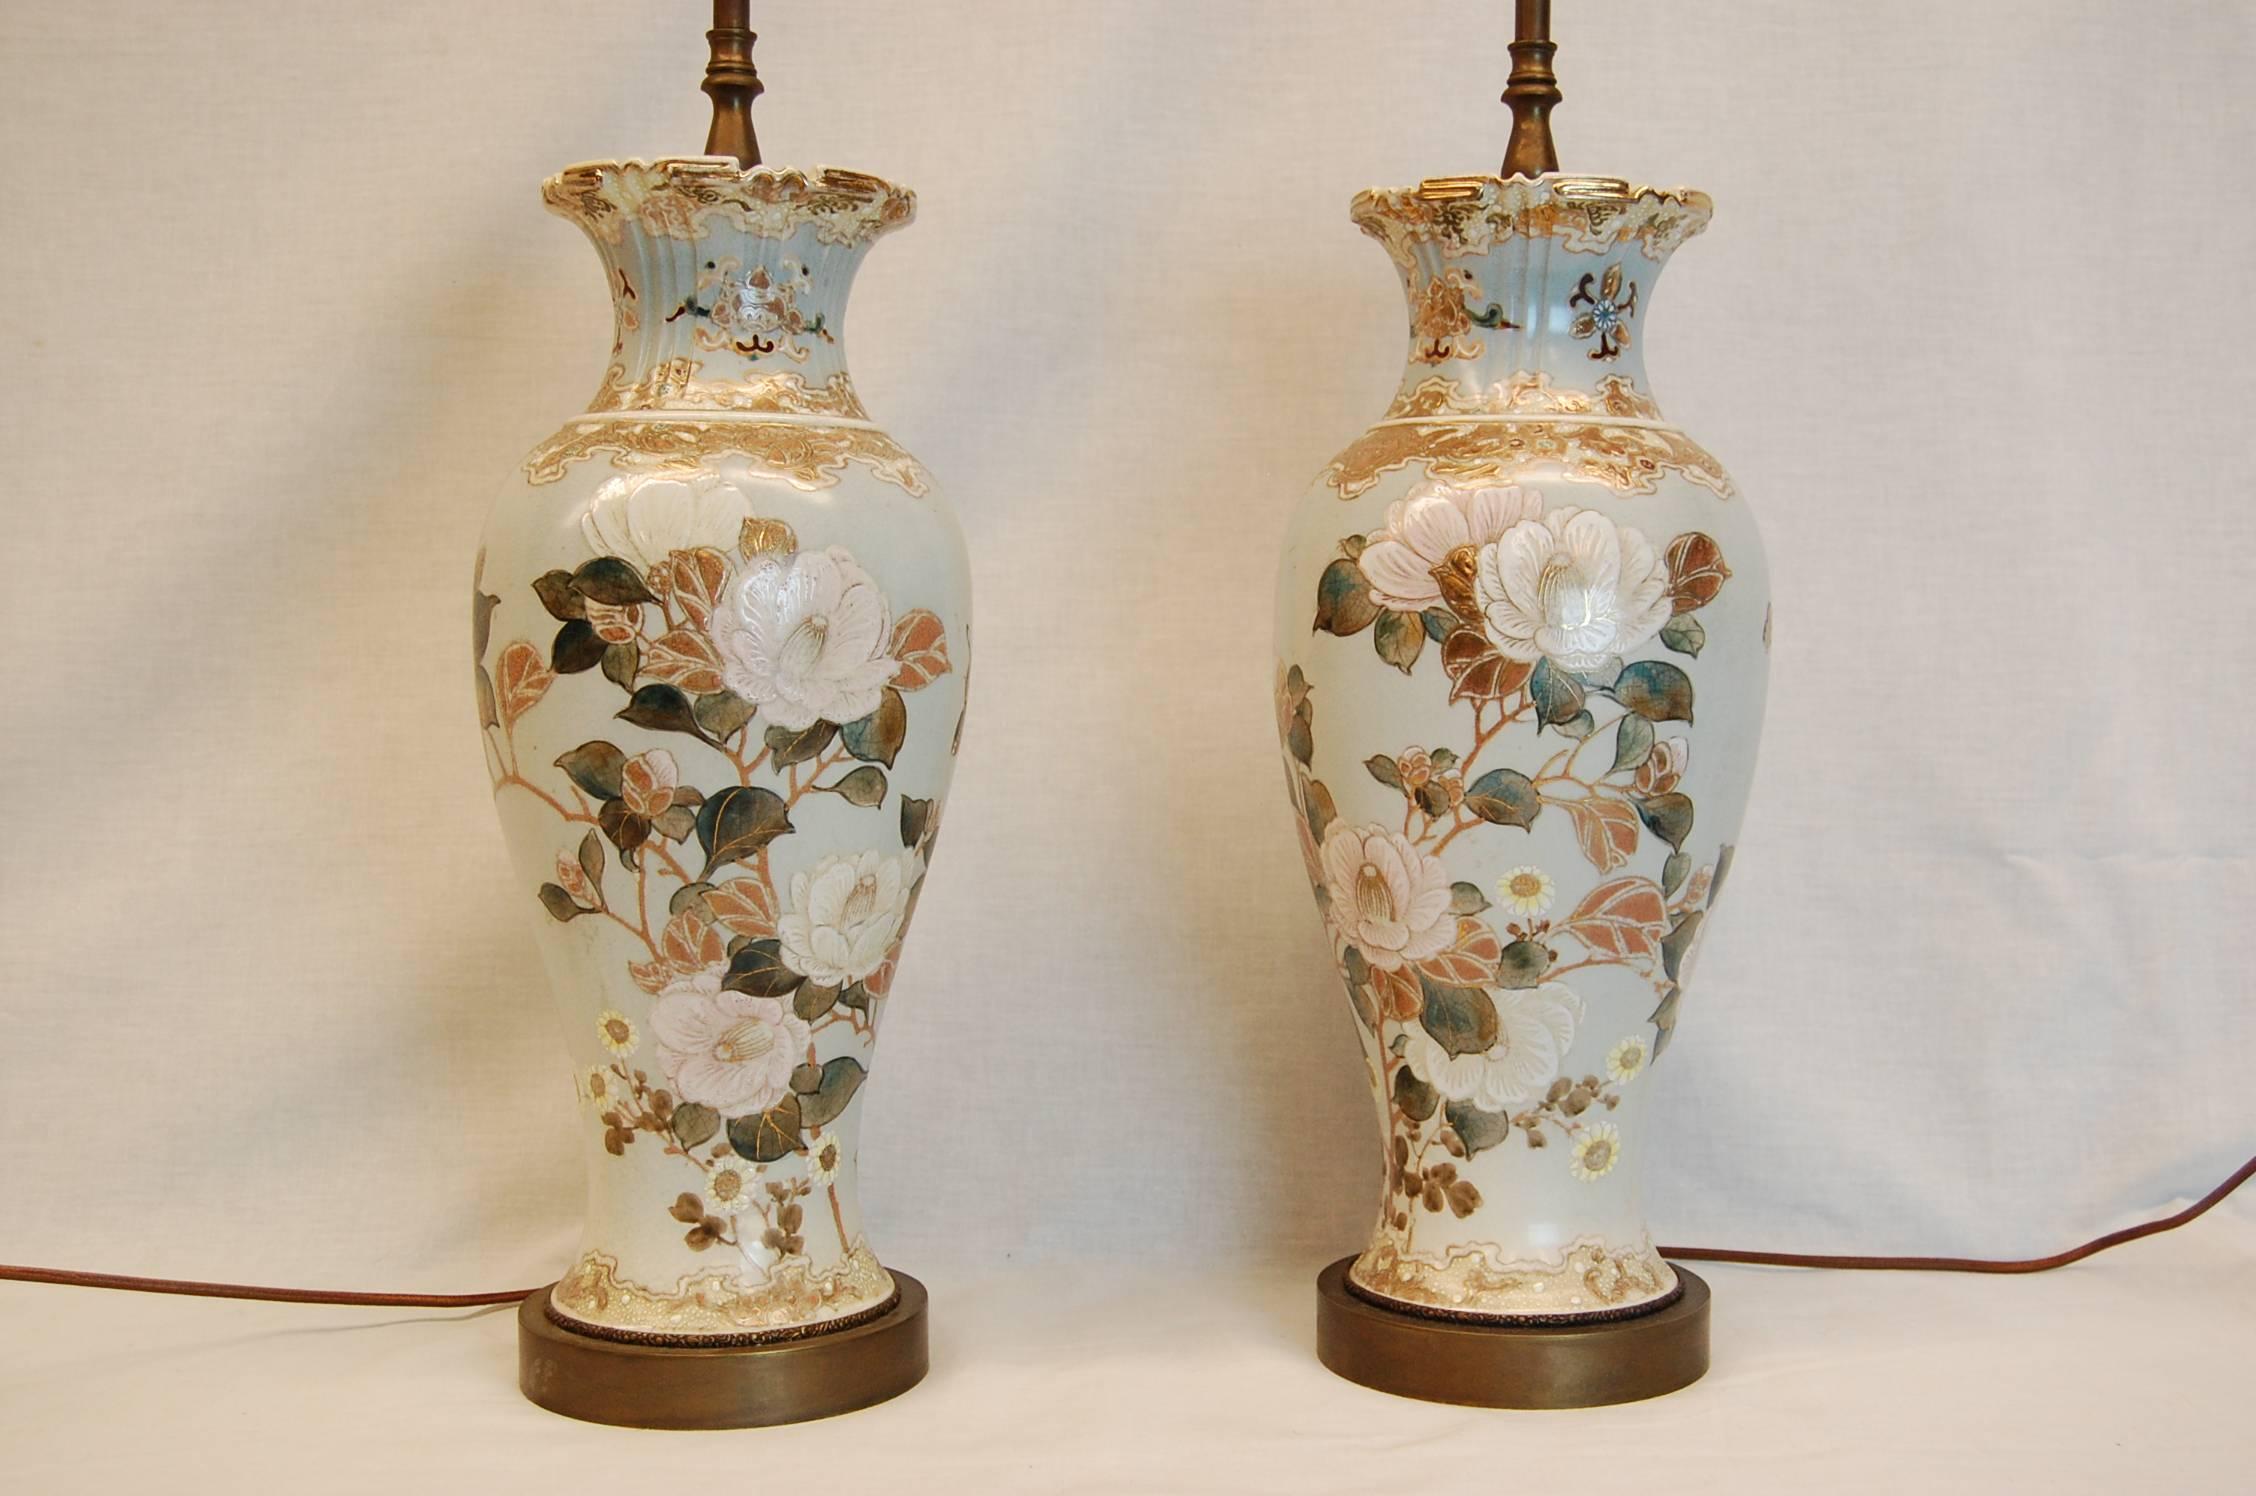 Unknown Pair of Floral and Gold Decorated Porcelain Vases Wired as Lamps, circa 1900